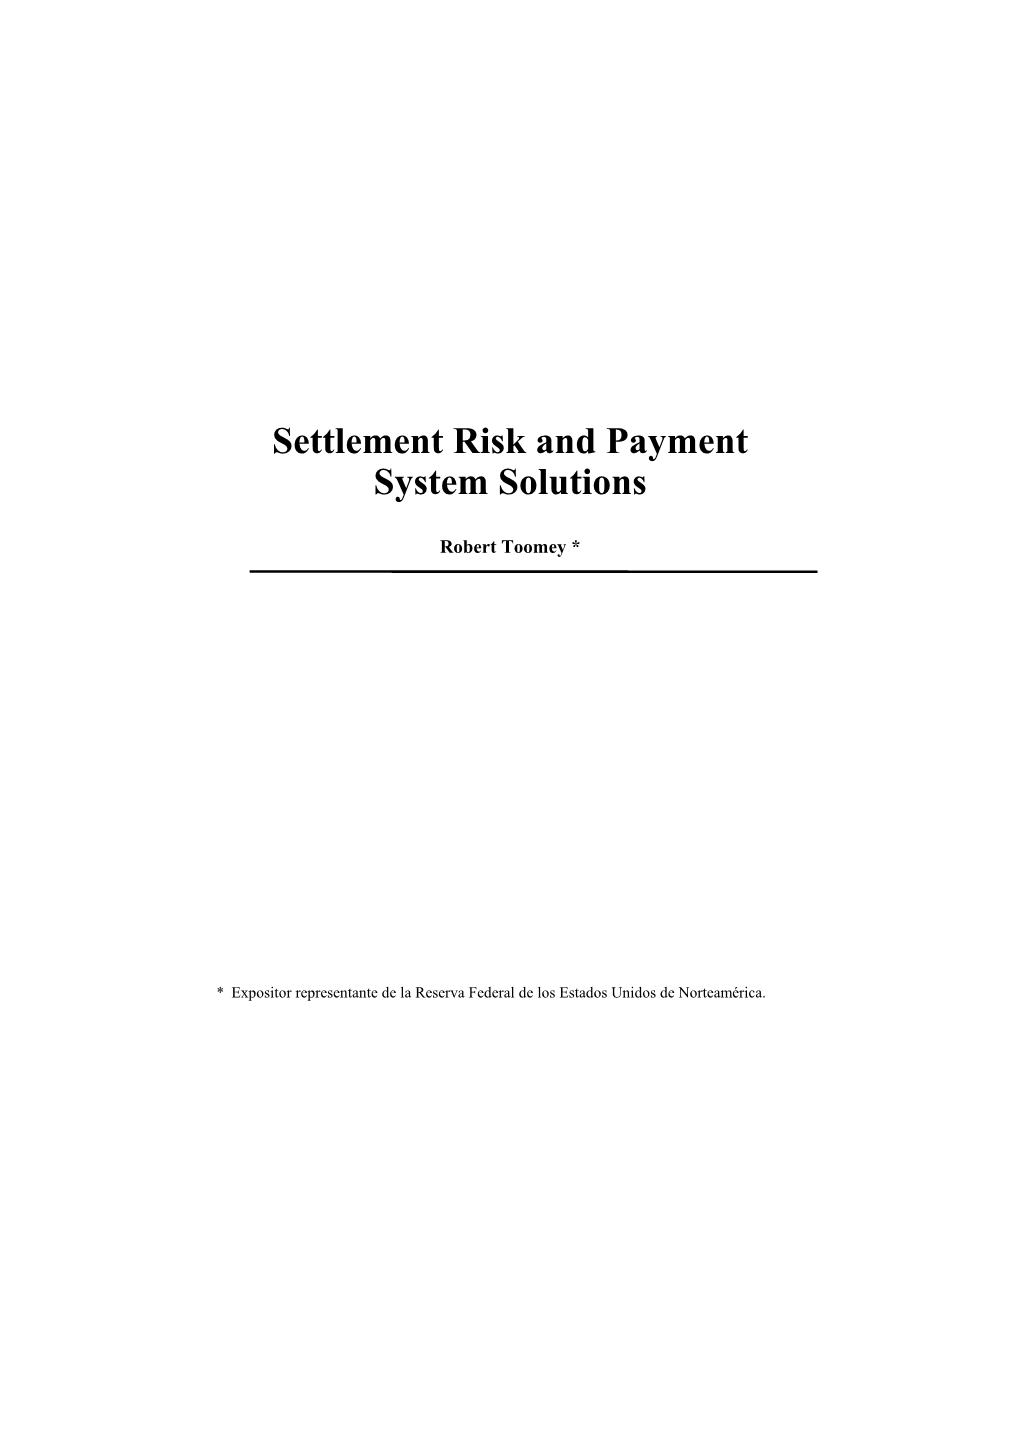 Settlement Risk and Payment System Solutions